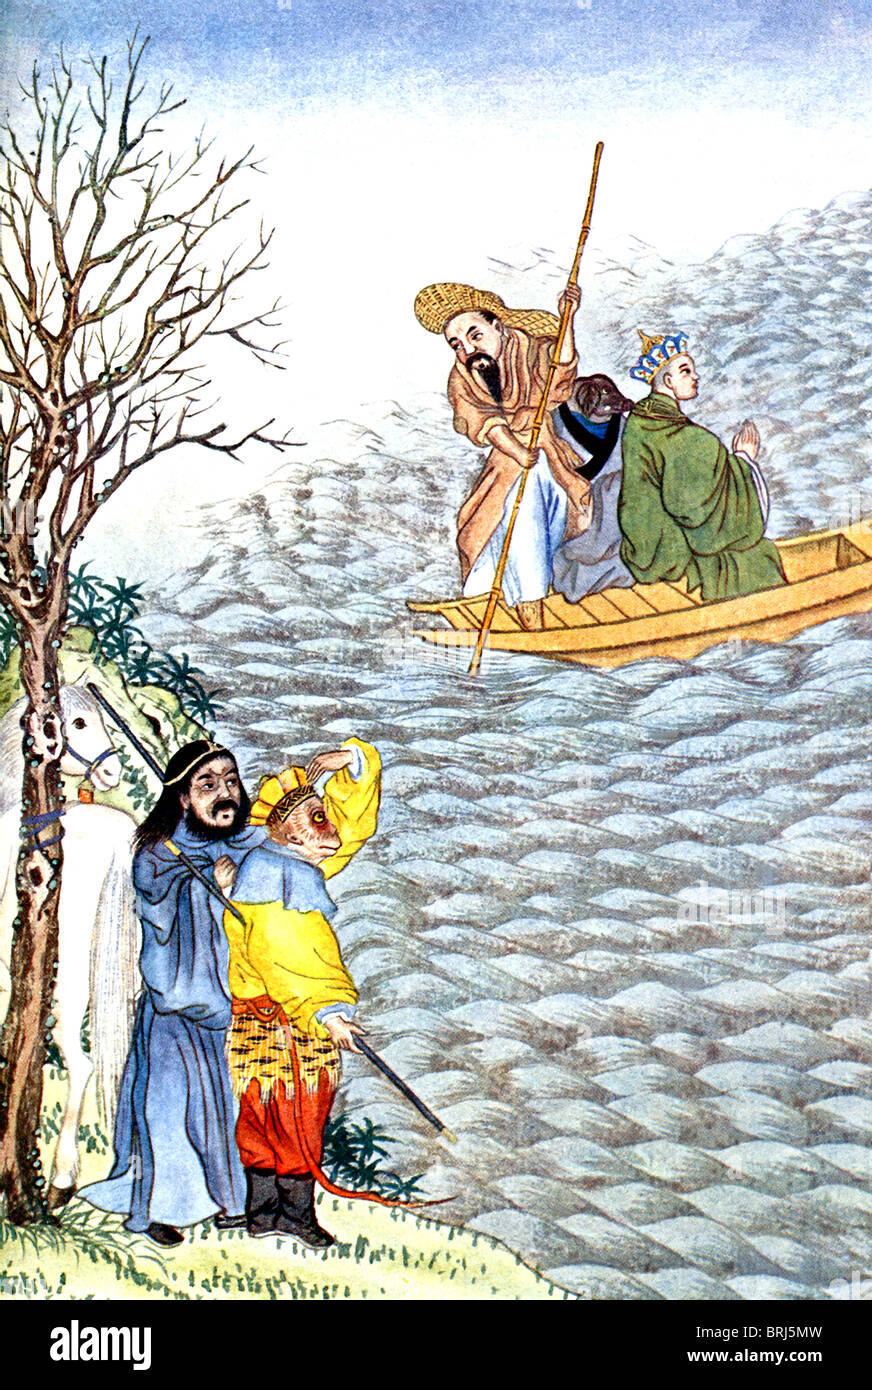 According to Chinese mythology, the priest Hsuan Chuang engaged a boat to take himself and his companions across a body of water. Stock Photo